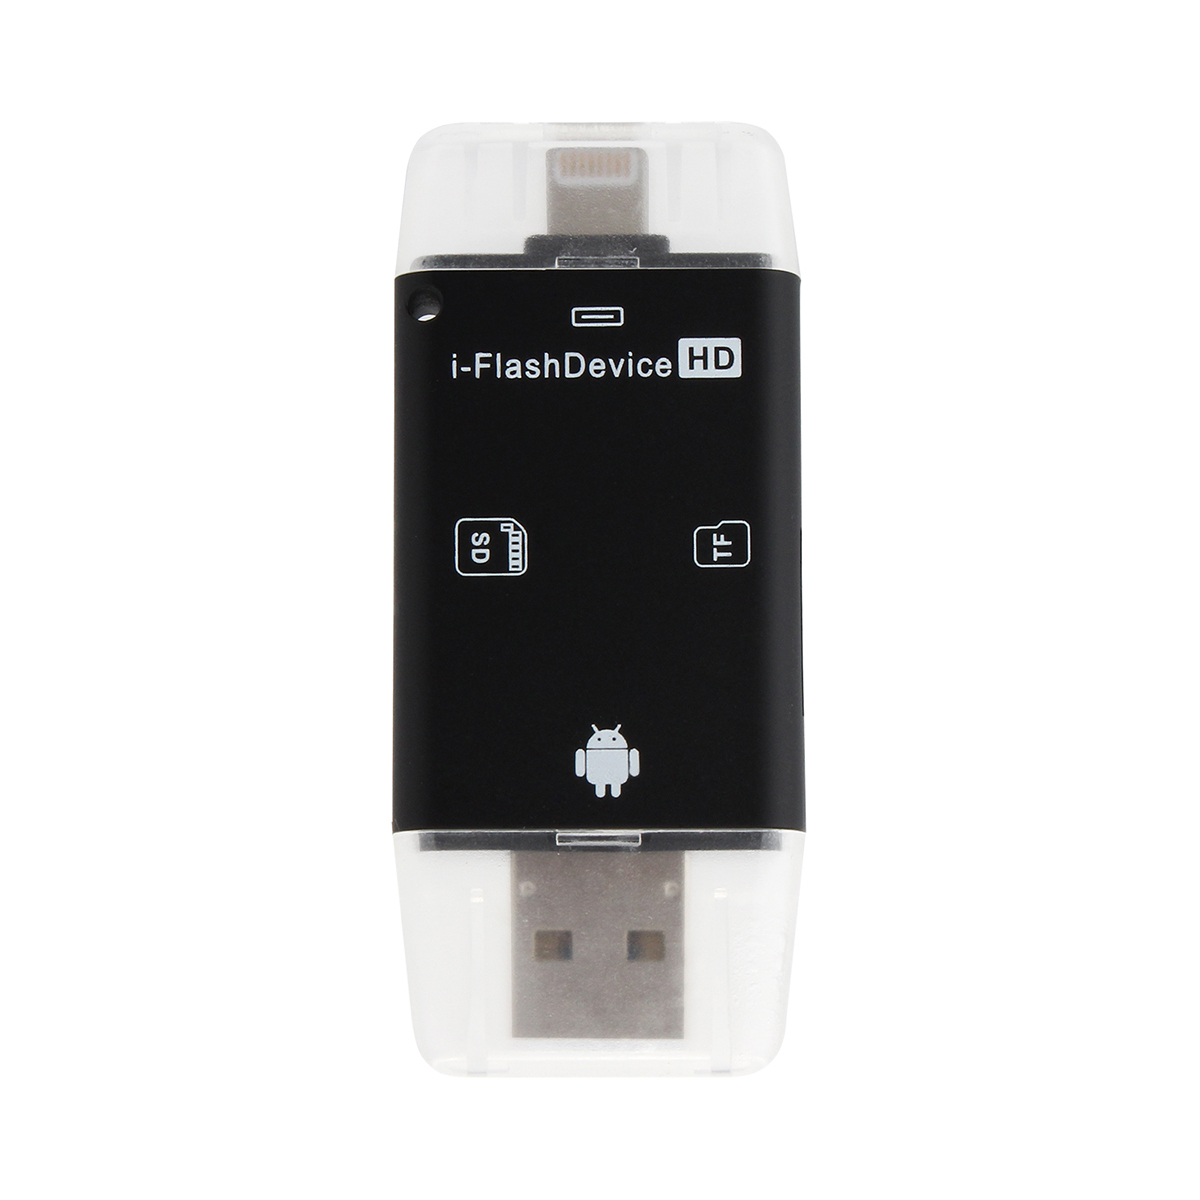 Universal Flash Drive SD Microsd TF Memory Card Reader for iPhone Android - Black